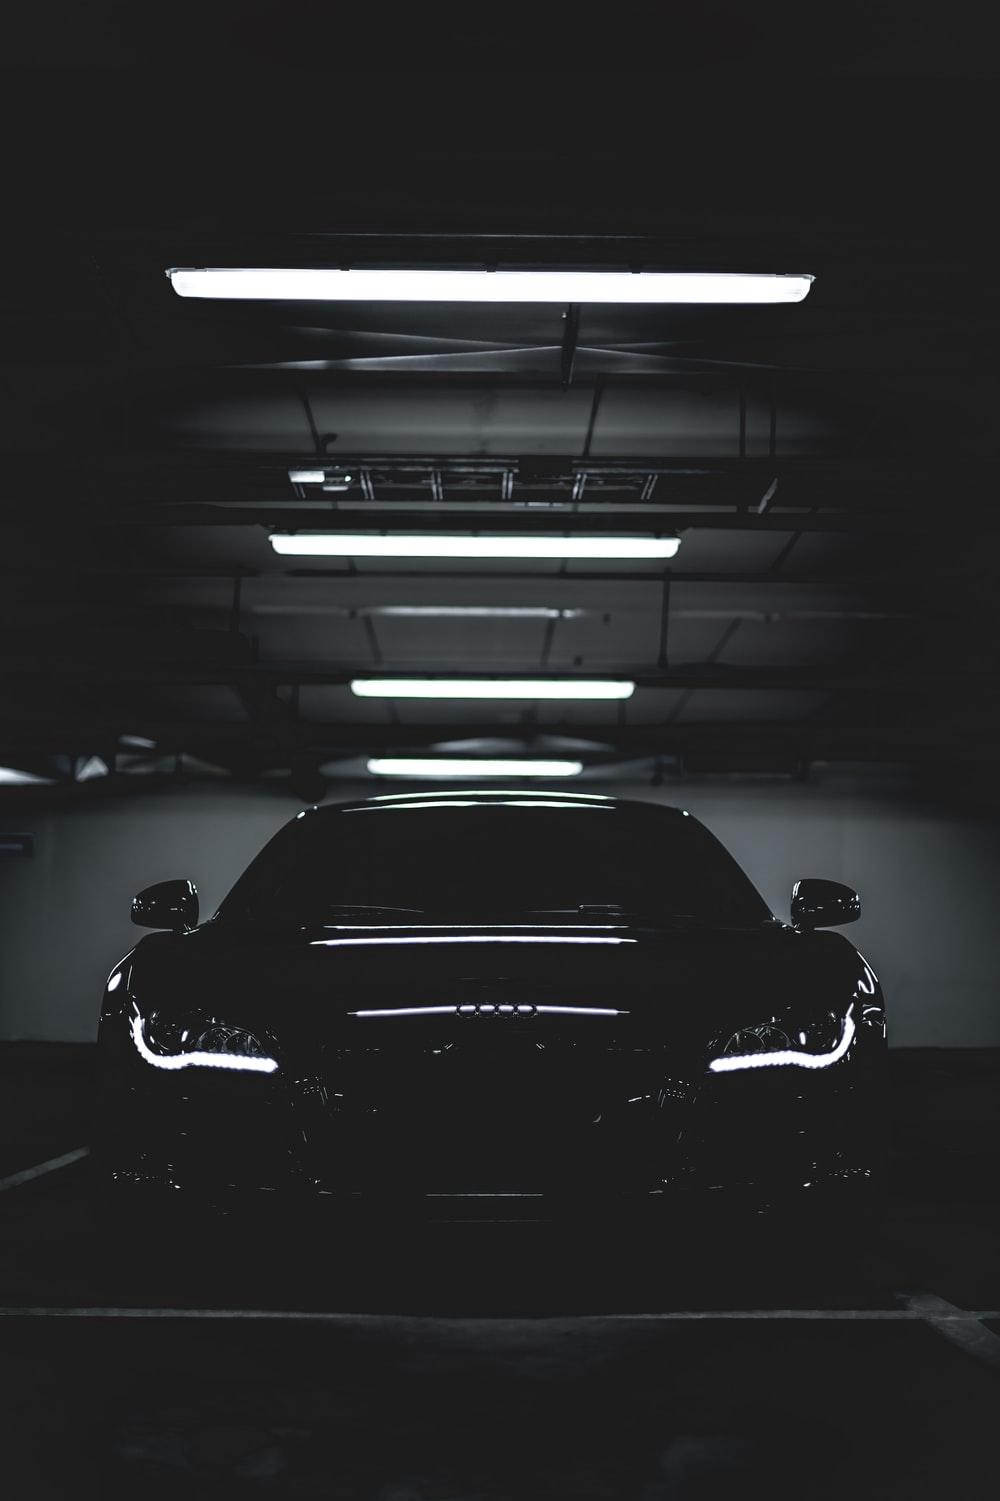 Grayscale Photo of a Sports Car Parked on the Road  Free Stock Photo